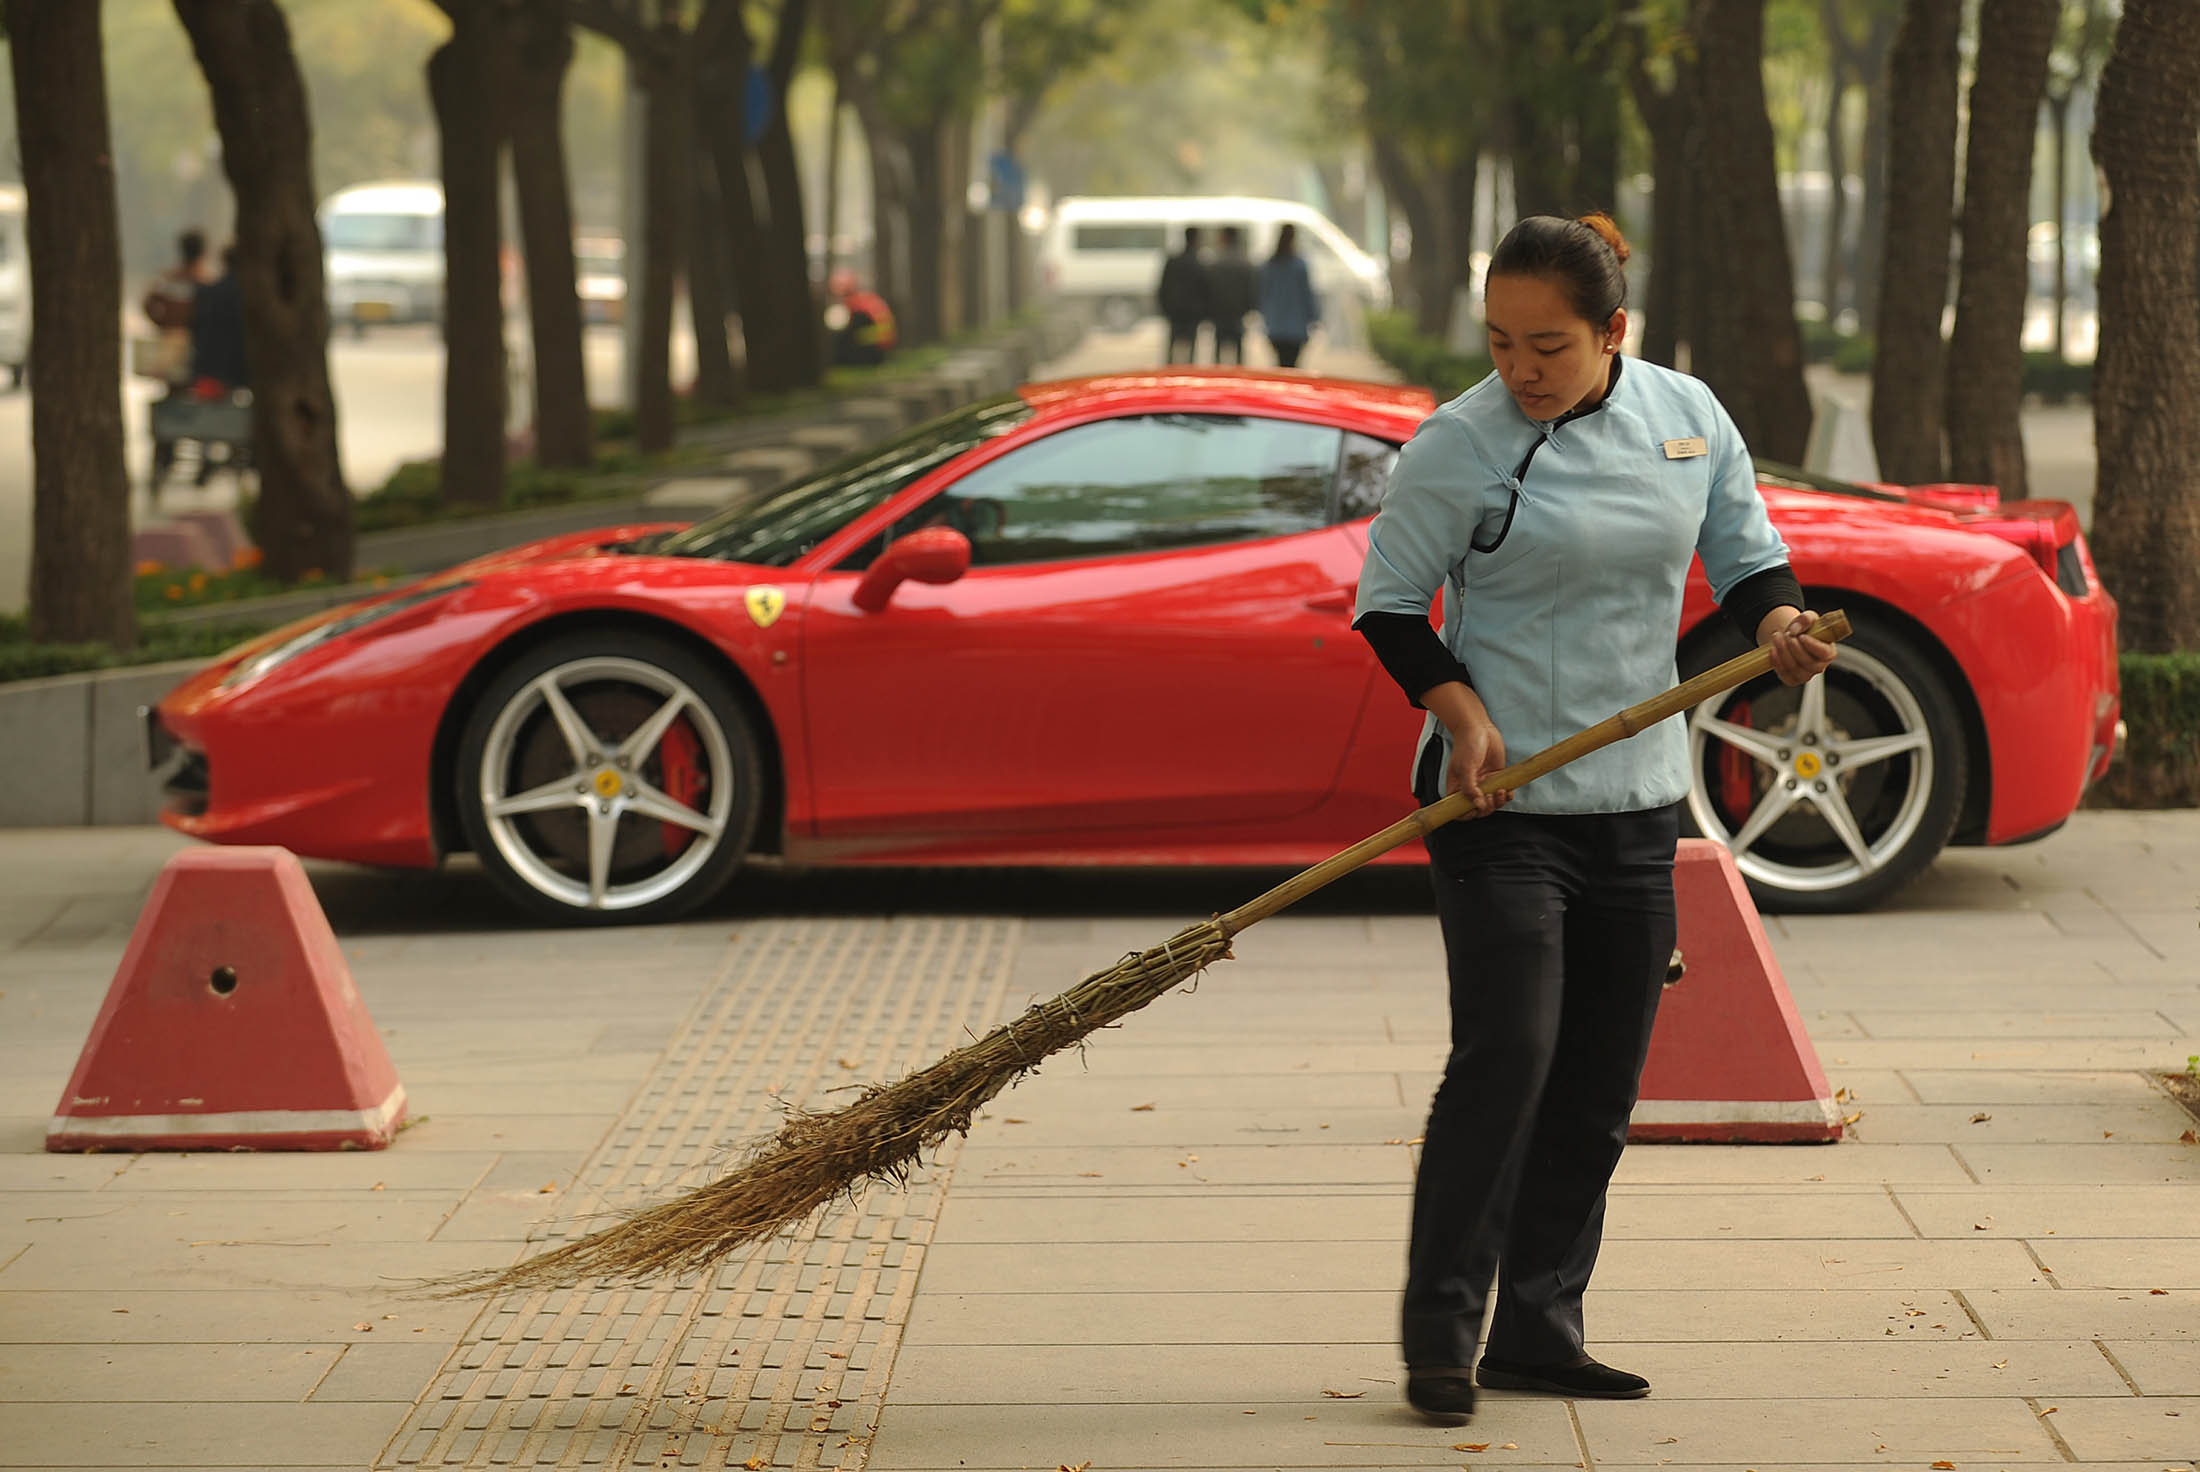 A woman sweeps leaves in front of a new Ferrari 458 Italia in Beijing on October 28, 2011. The head of the European bail-out fund dampened hopes October 28 that China Would come to a debt-stricken EU's rescue, but left the door open for a deal with the world's second-biggest economy. AFP PHOTO / Peter PARKS (Photo credit should read PETER PARKS/AFP/Getty Images)
